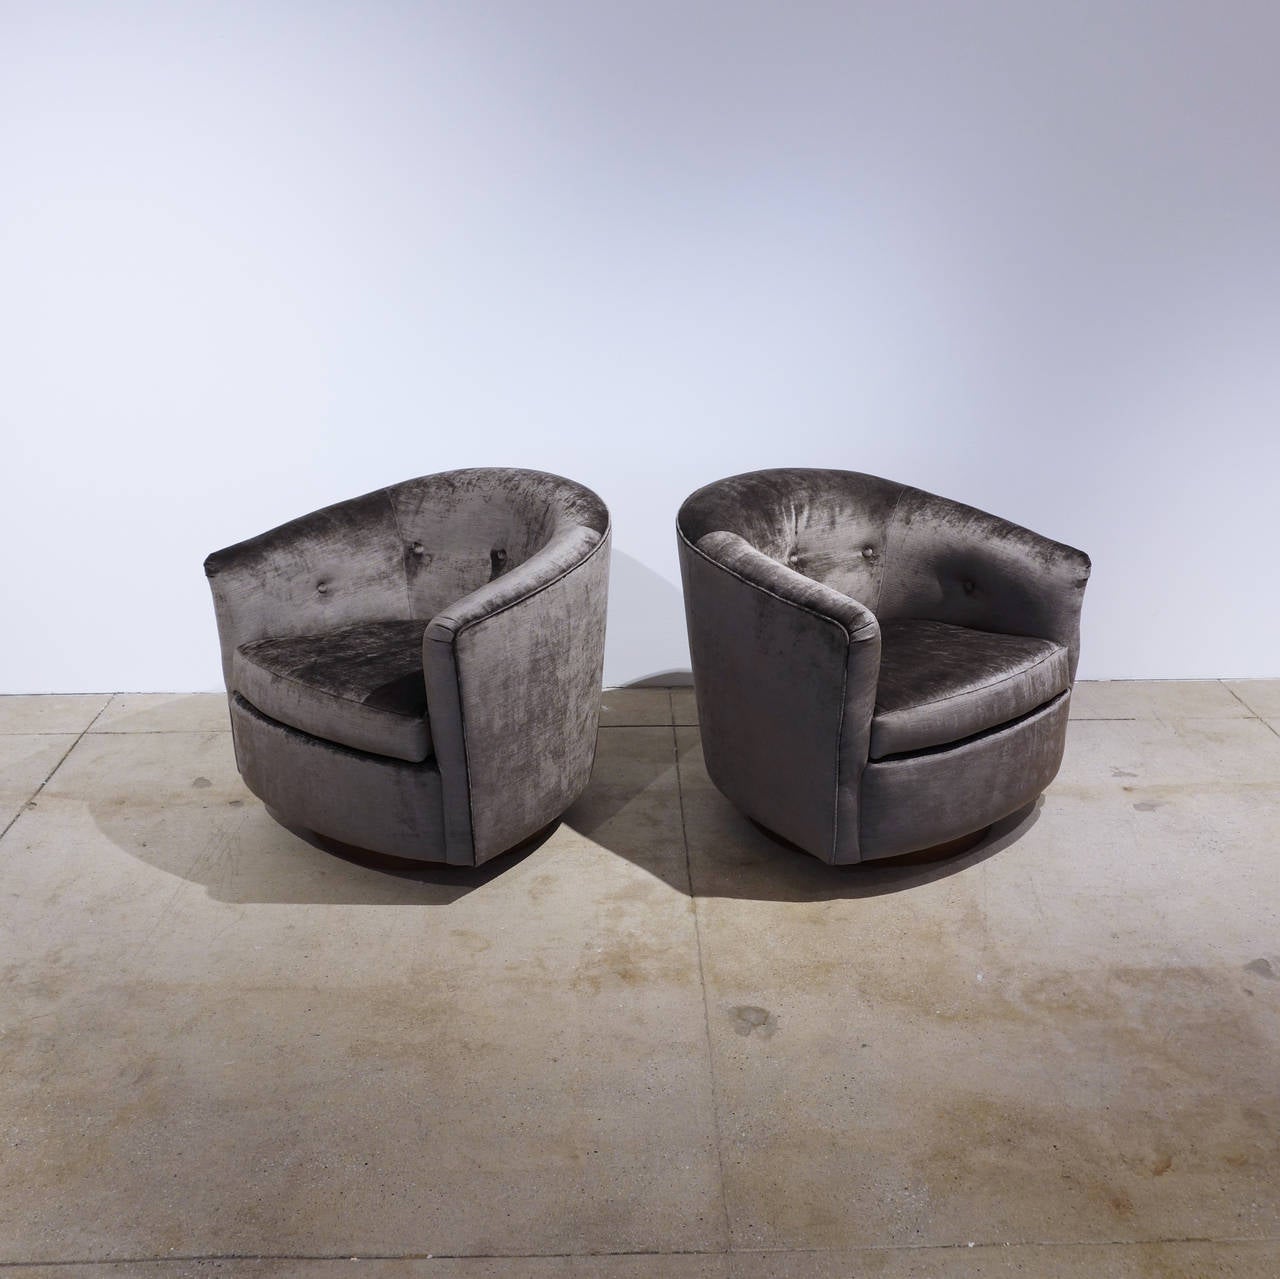 A glamorous pair of swivel rockers by Milo Baughman, reupholstered in a mushroom gray velvet. Price is for the pair.